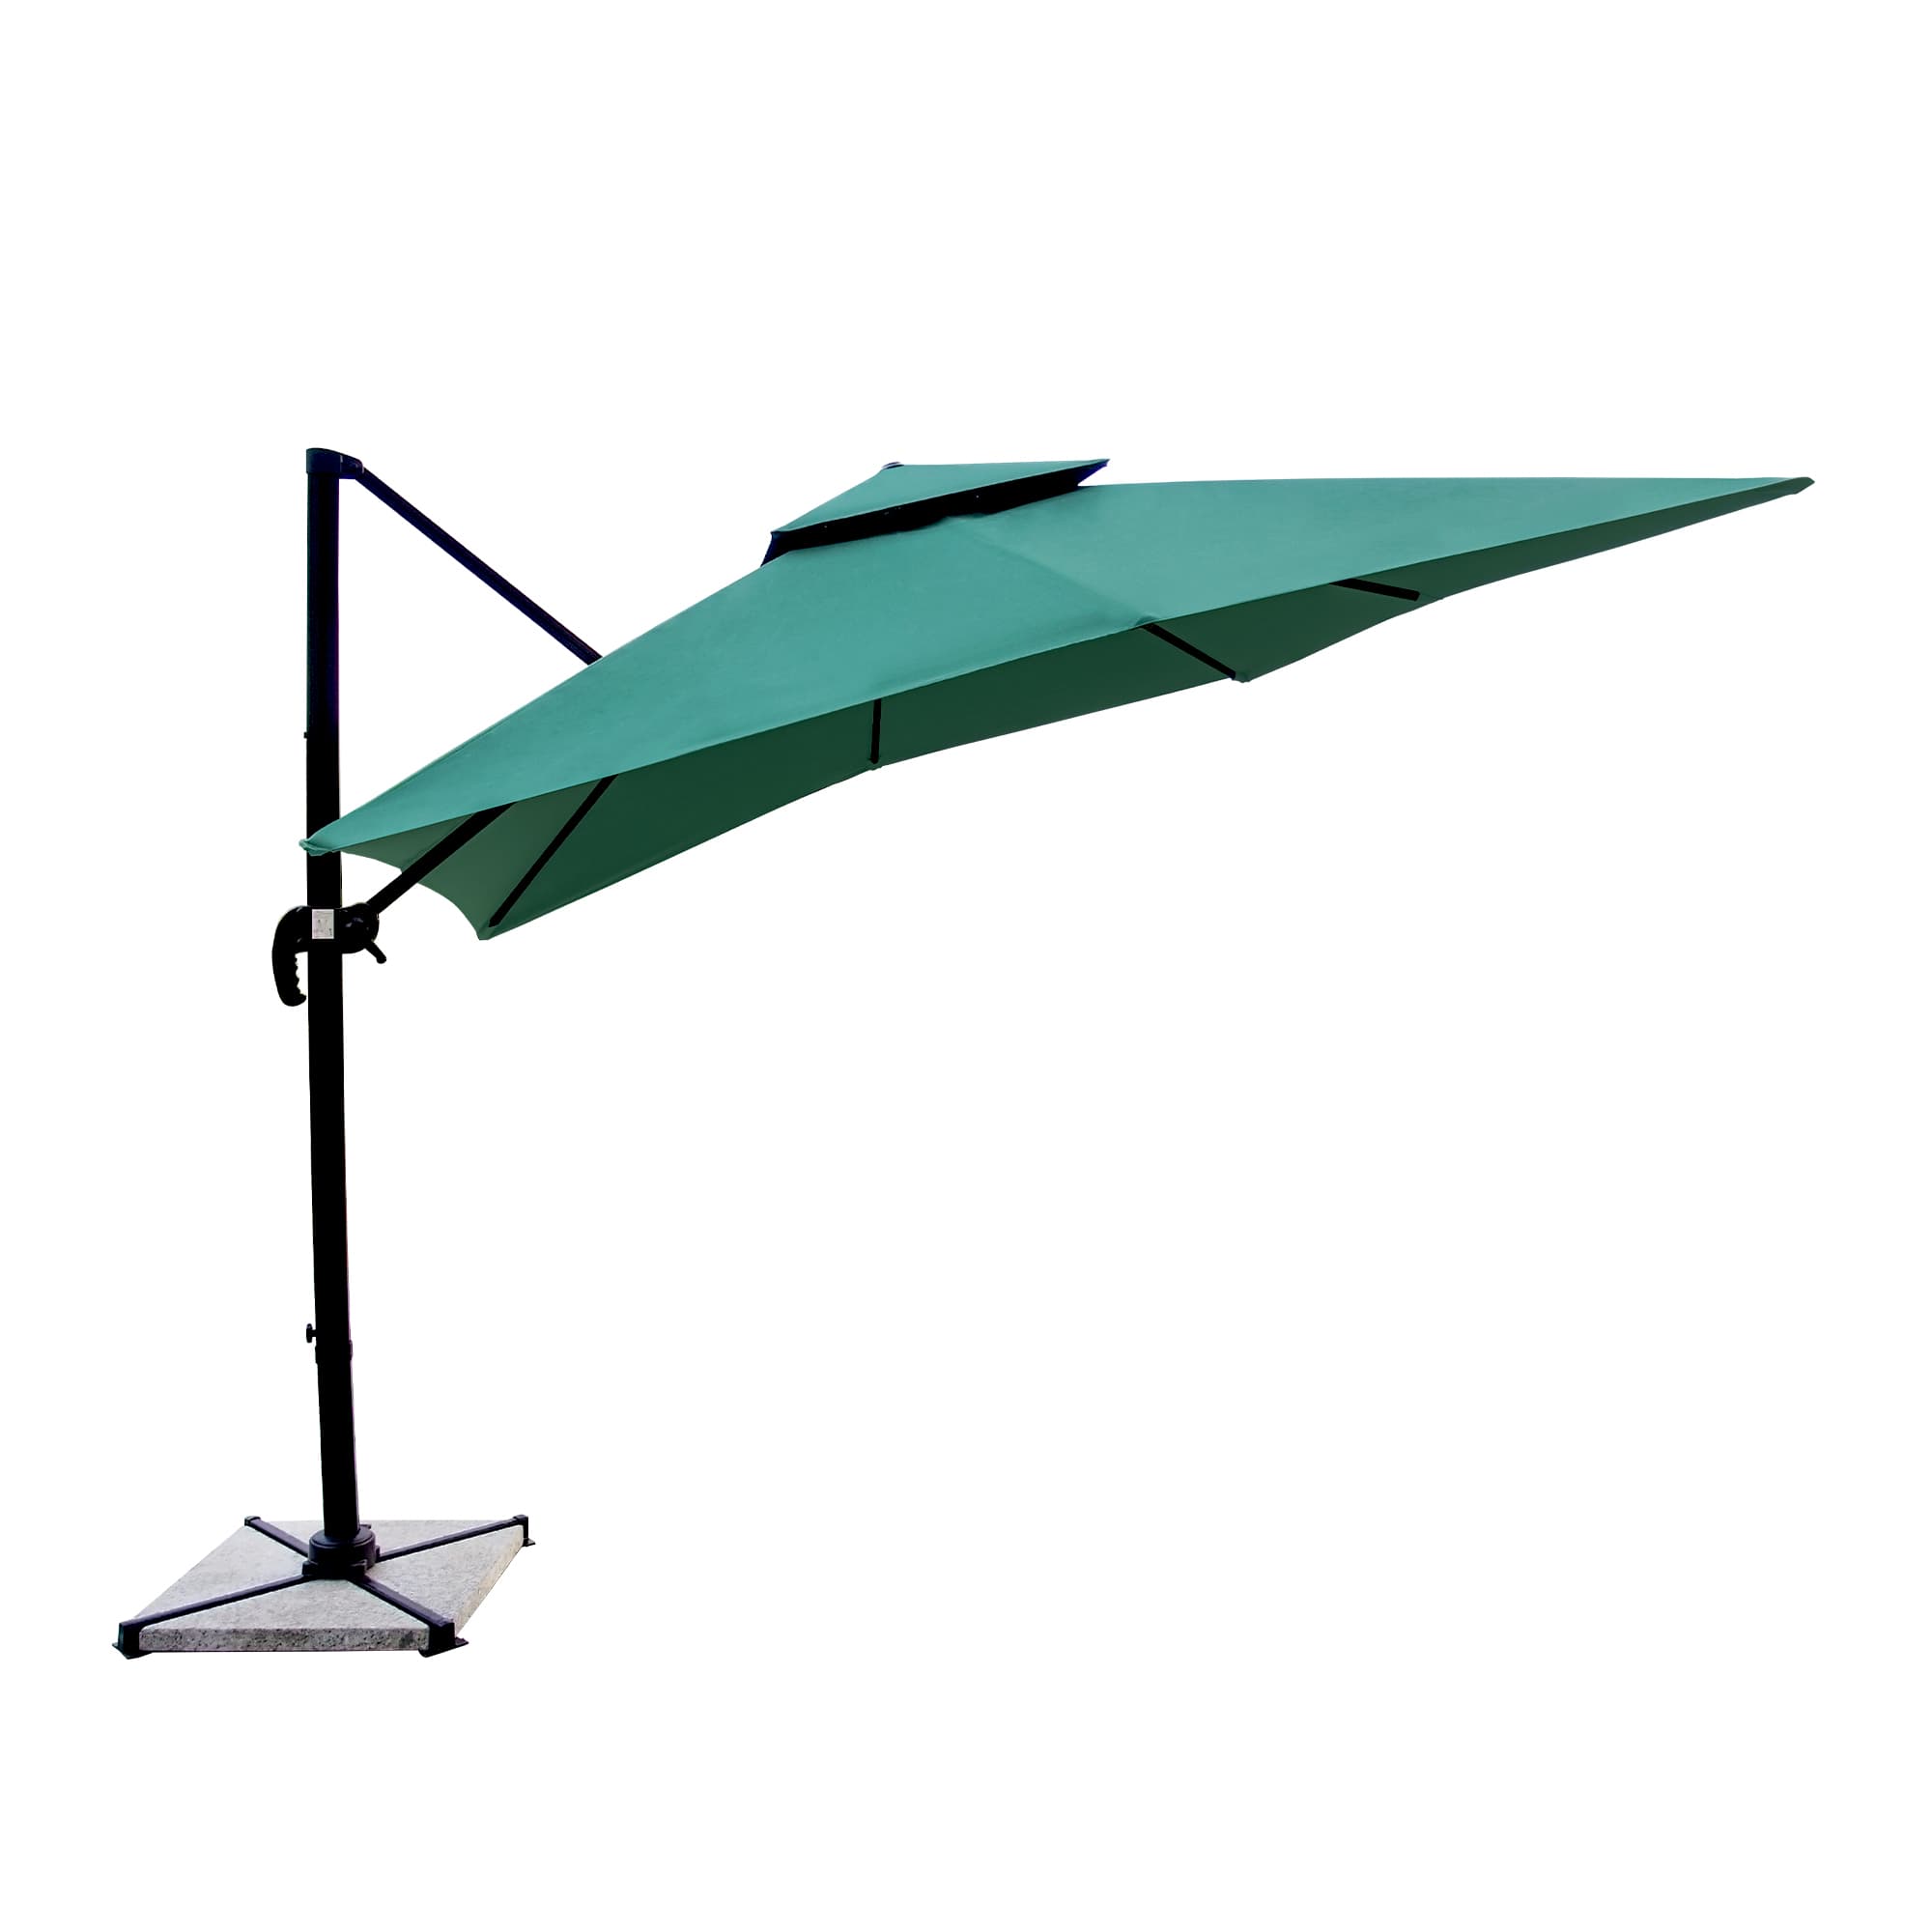 Olilawn 10' x 10' Honolulu Square Cantilever Umbrella with Double Top